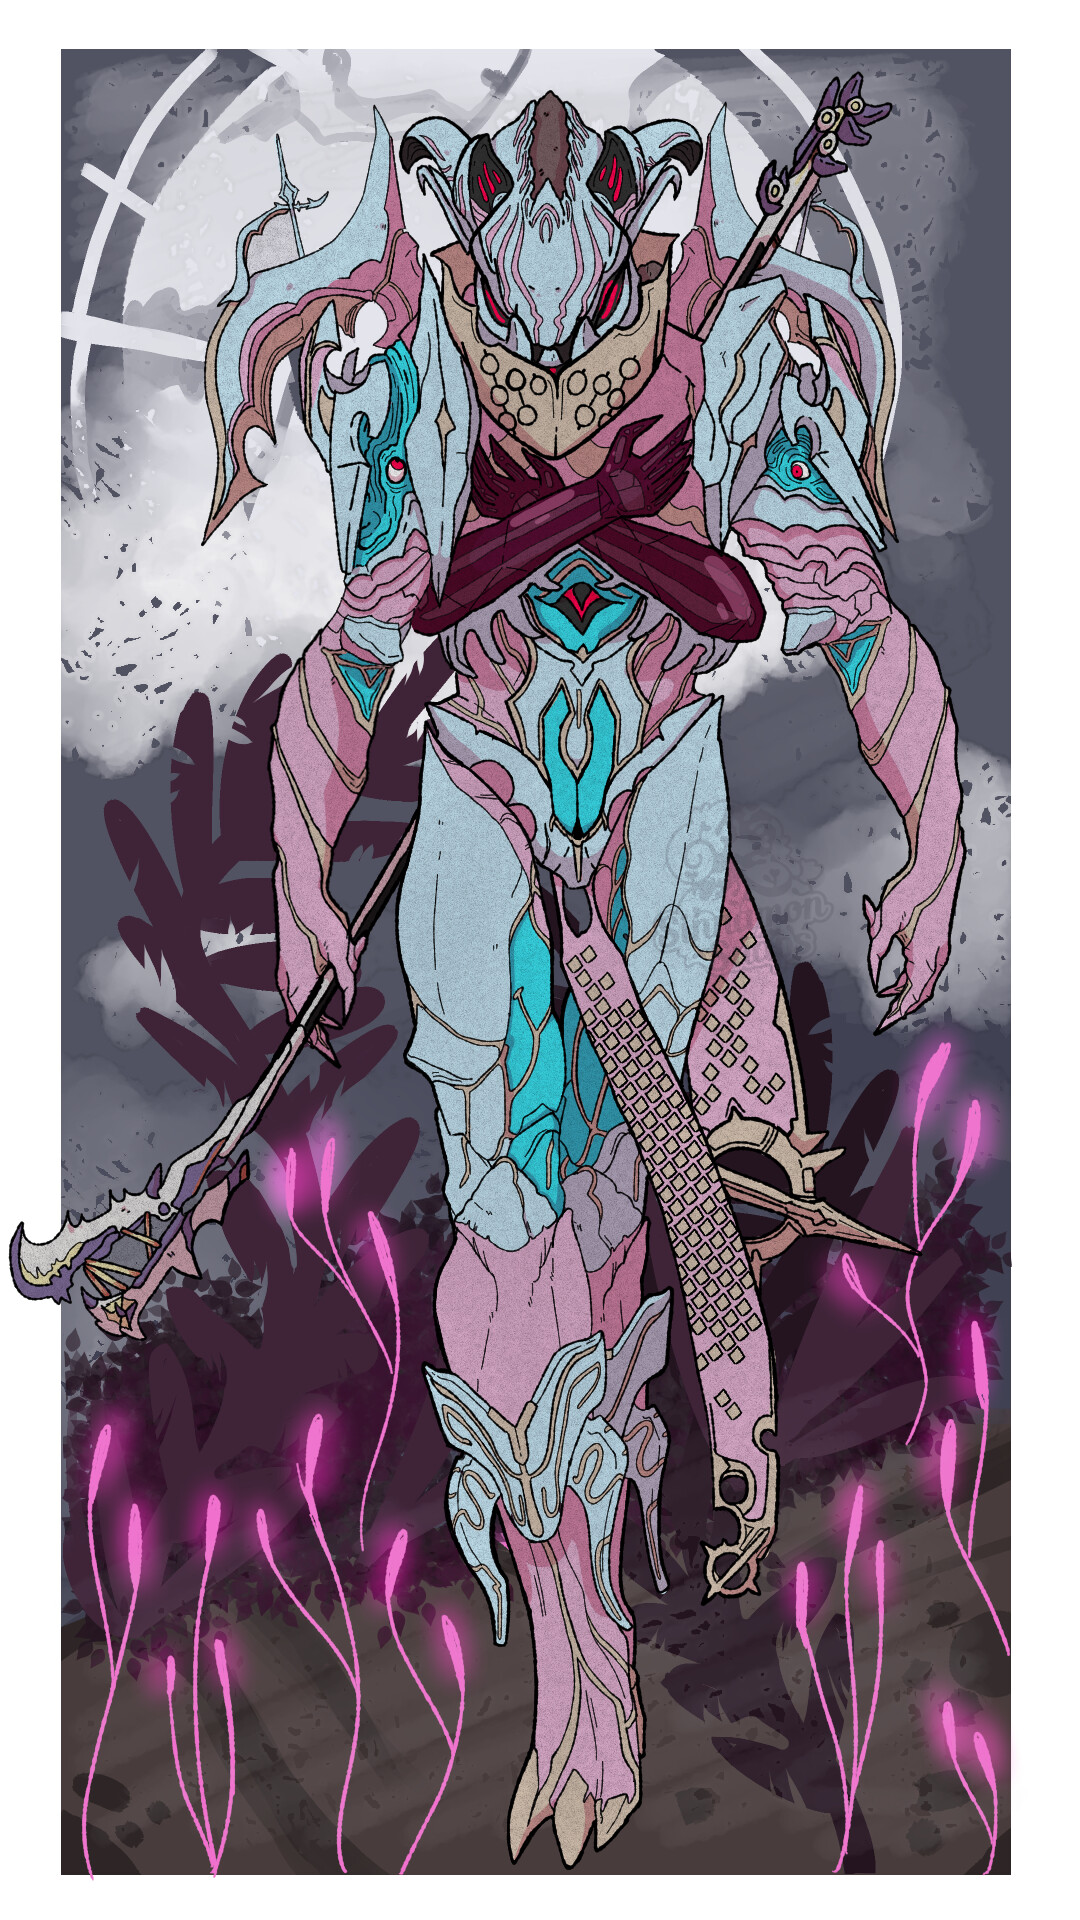 Fan art of the character Nidus from Digital Extremes' game Warframe. 